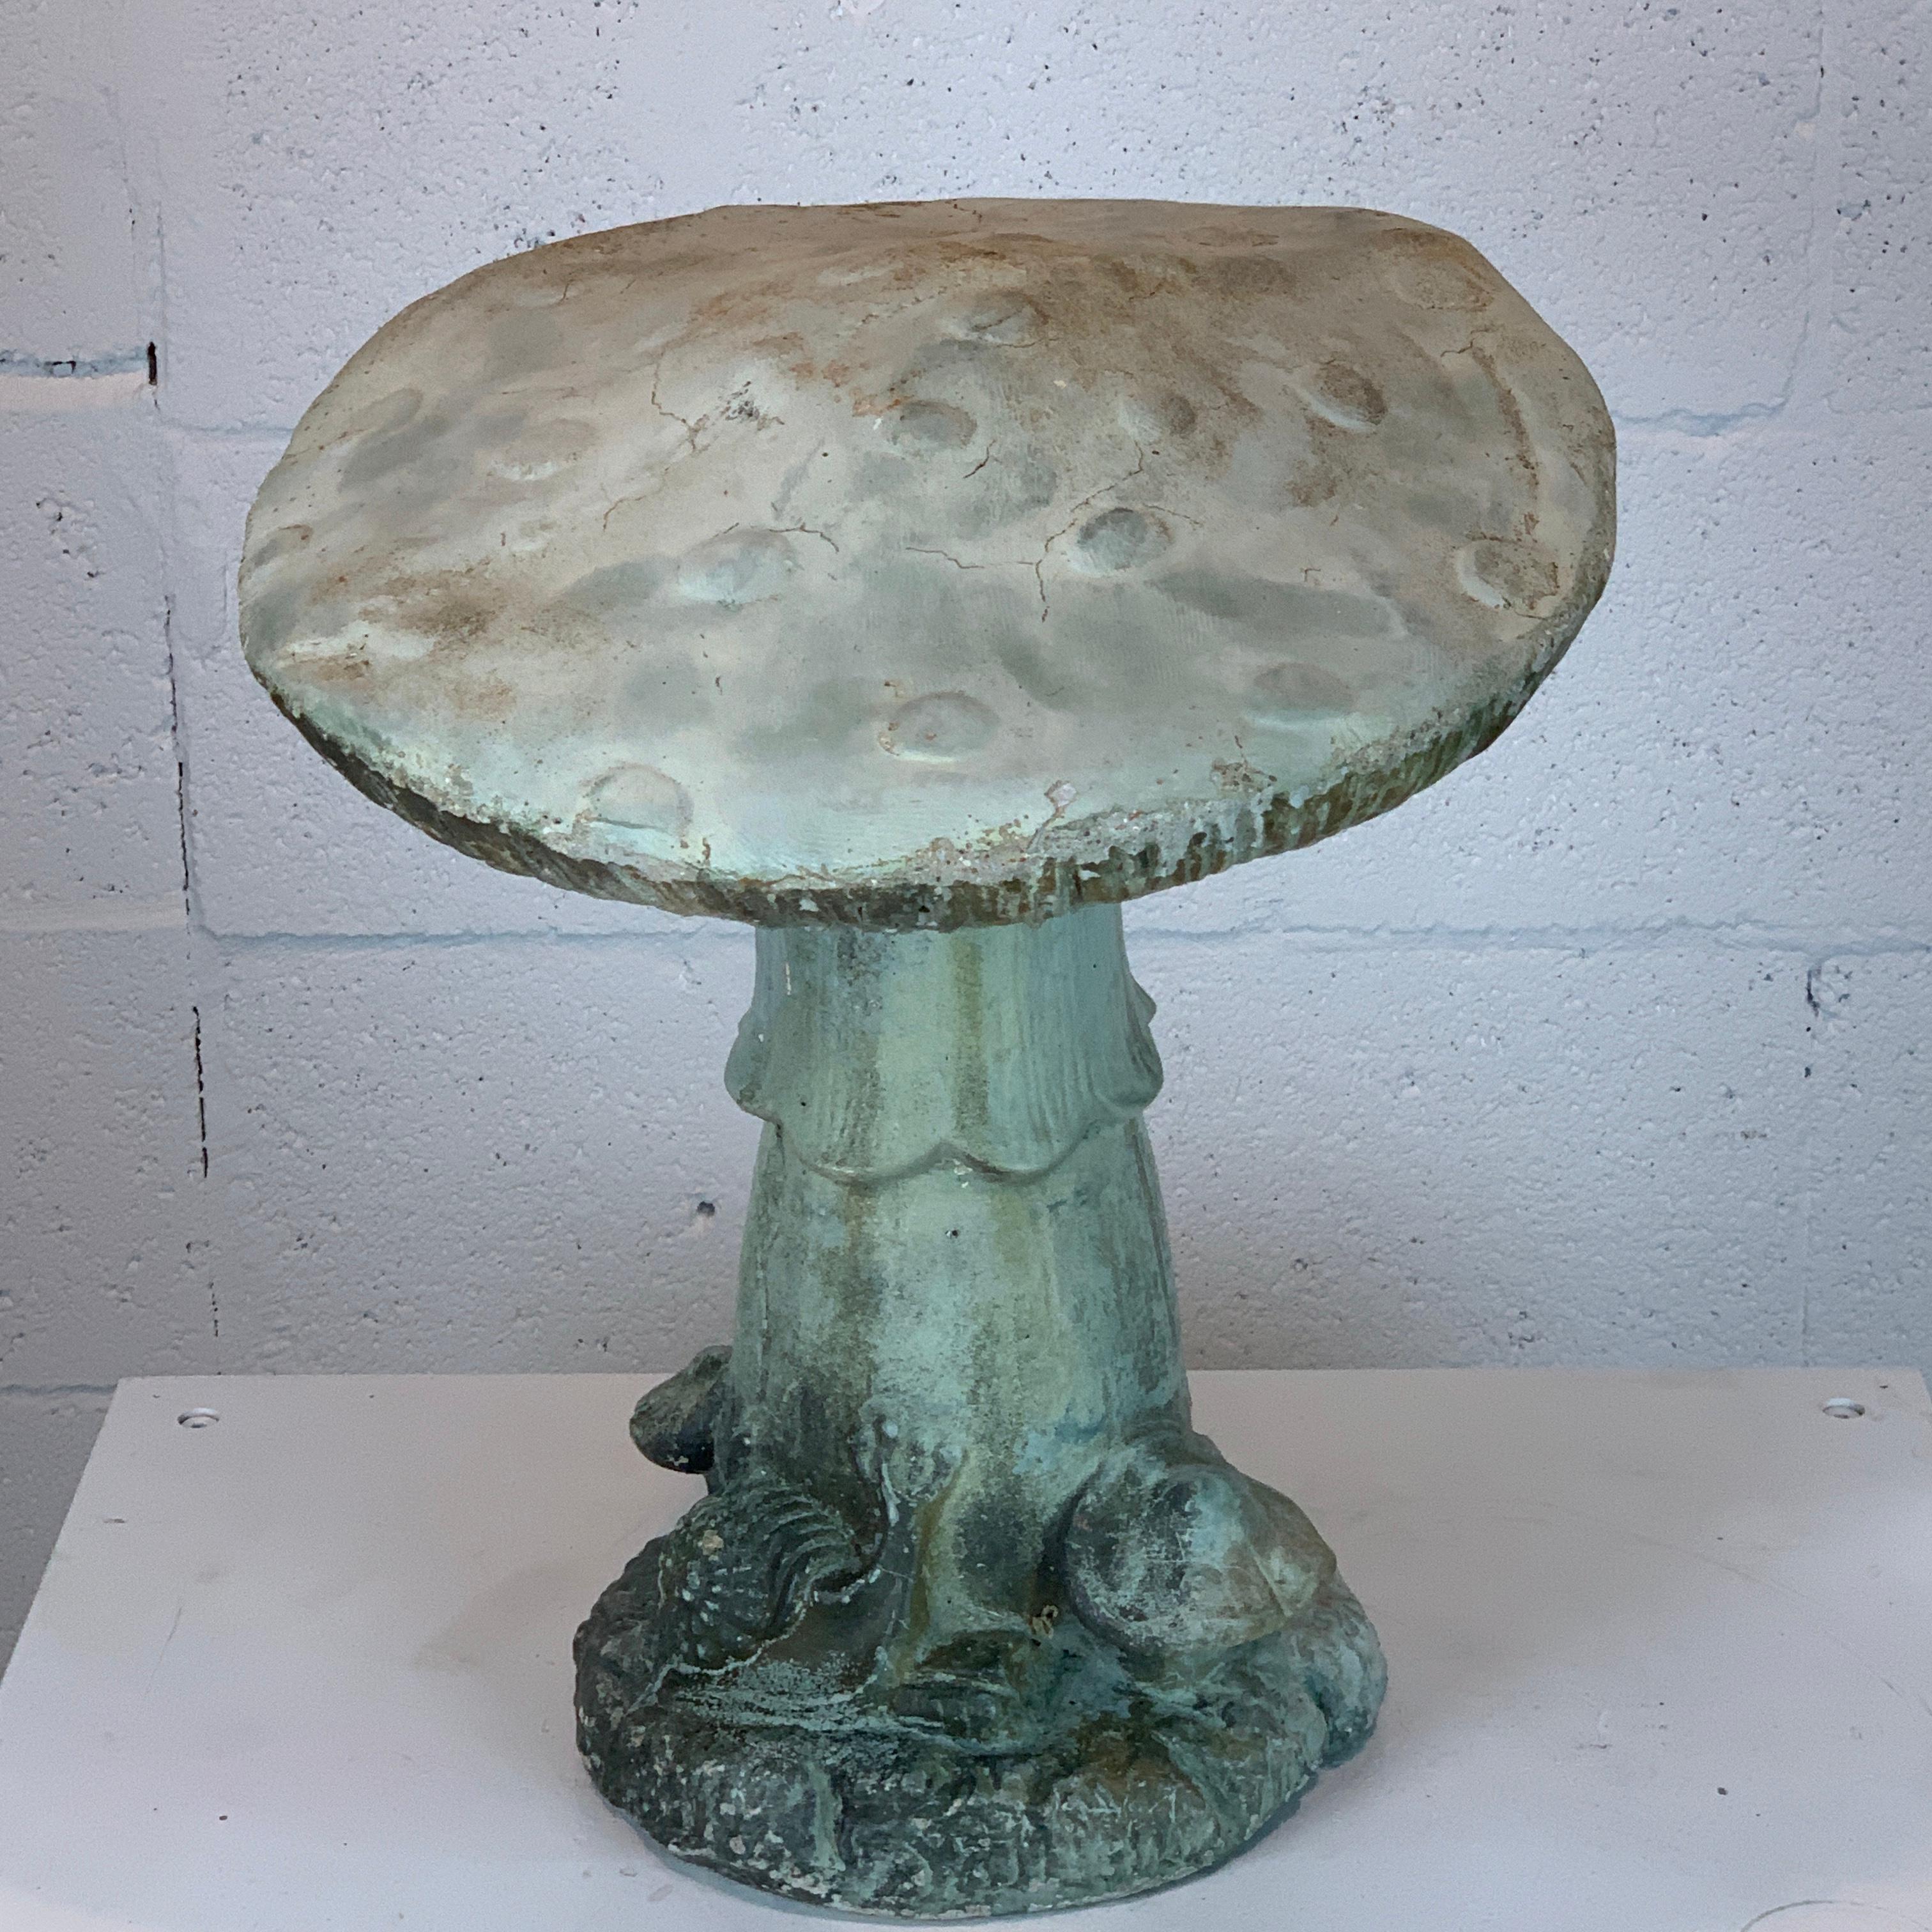 Vintage whimsical cast stone mushroom garden ornament, circa 1960
Realistically cast and modeled, with beautiful weathered verdigris patina.
Inscribed illegibly copyrighted numbered 2400.
Standing 16-inches high with a 13.5-inch diameter and a